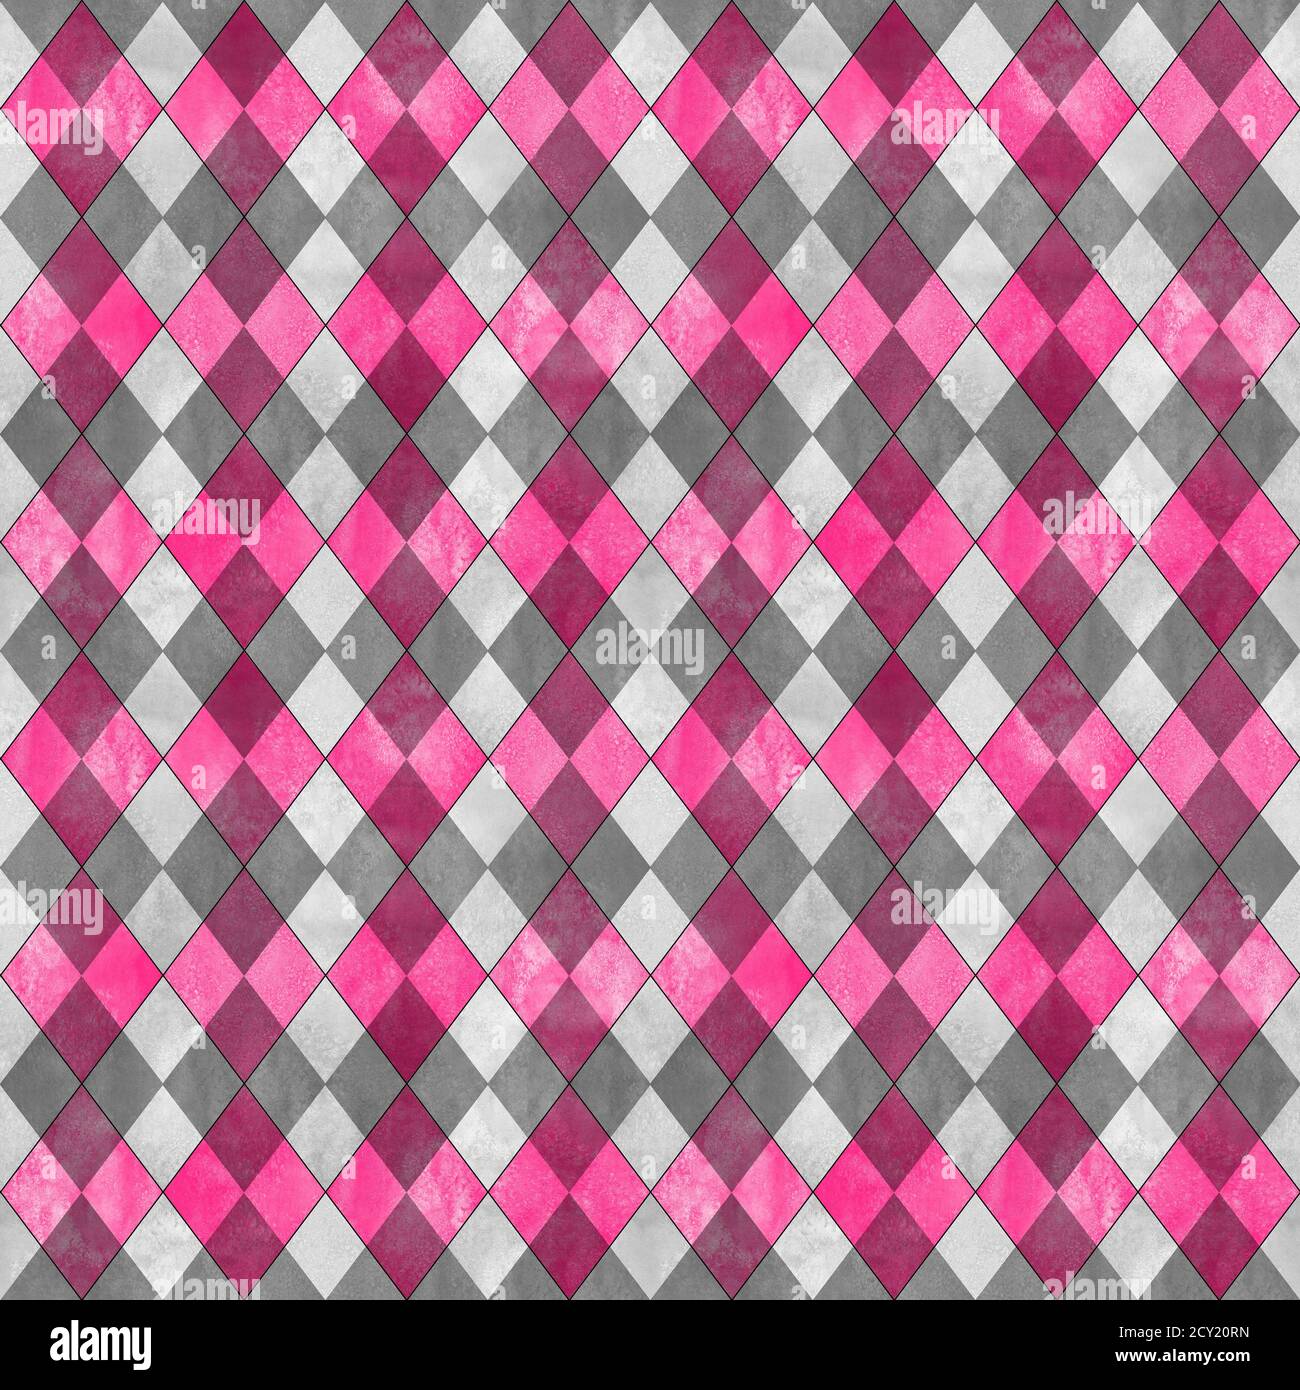 Argyle seamless plaid pattern. Watercolor hand drawn gray and pink texture background. Watercolour diamond shapes background. Print for cloth design, Stock Photo